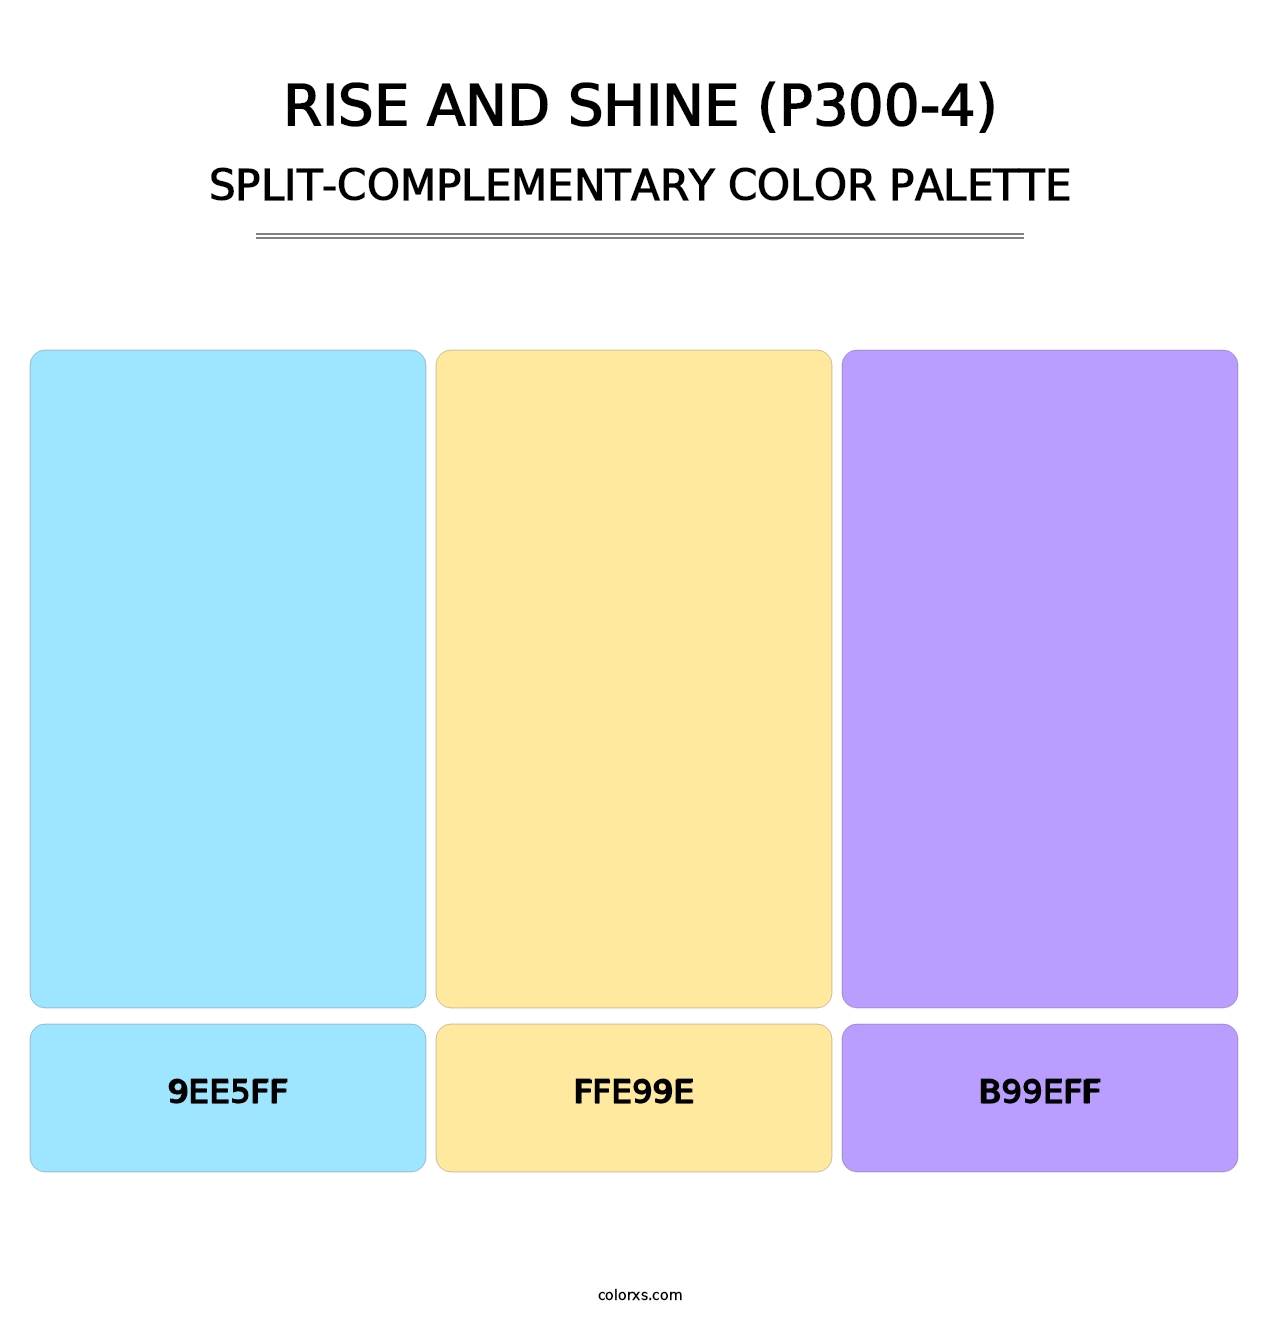 Rise And Shine (P300-4) - Split-Complementary Color Palette